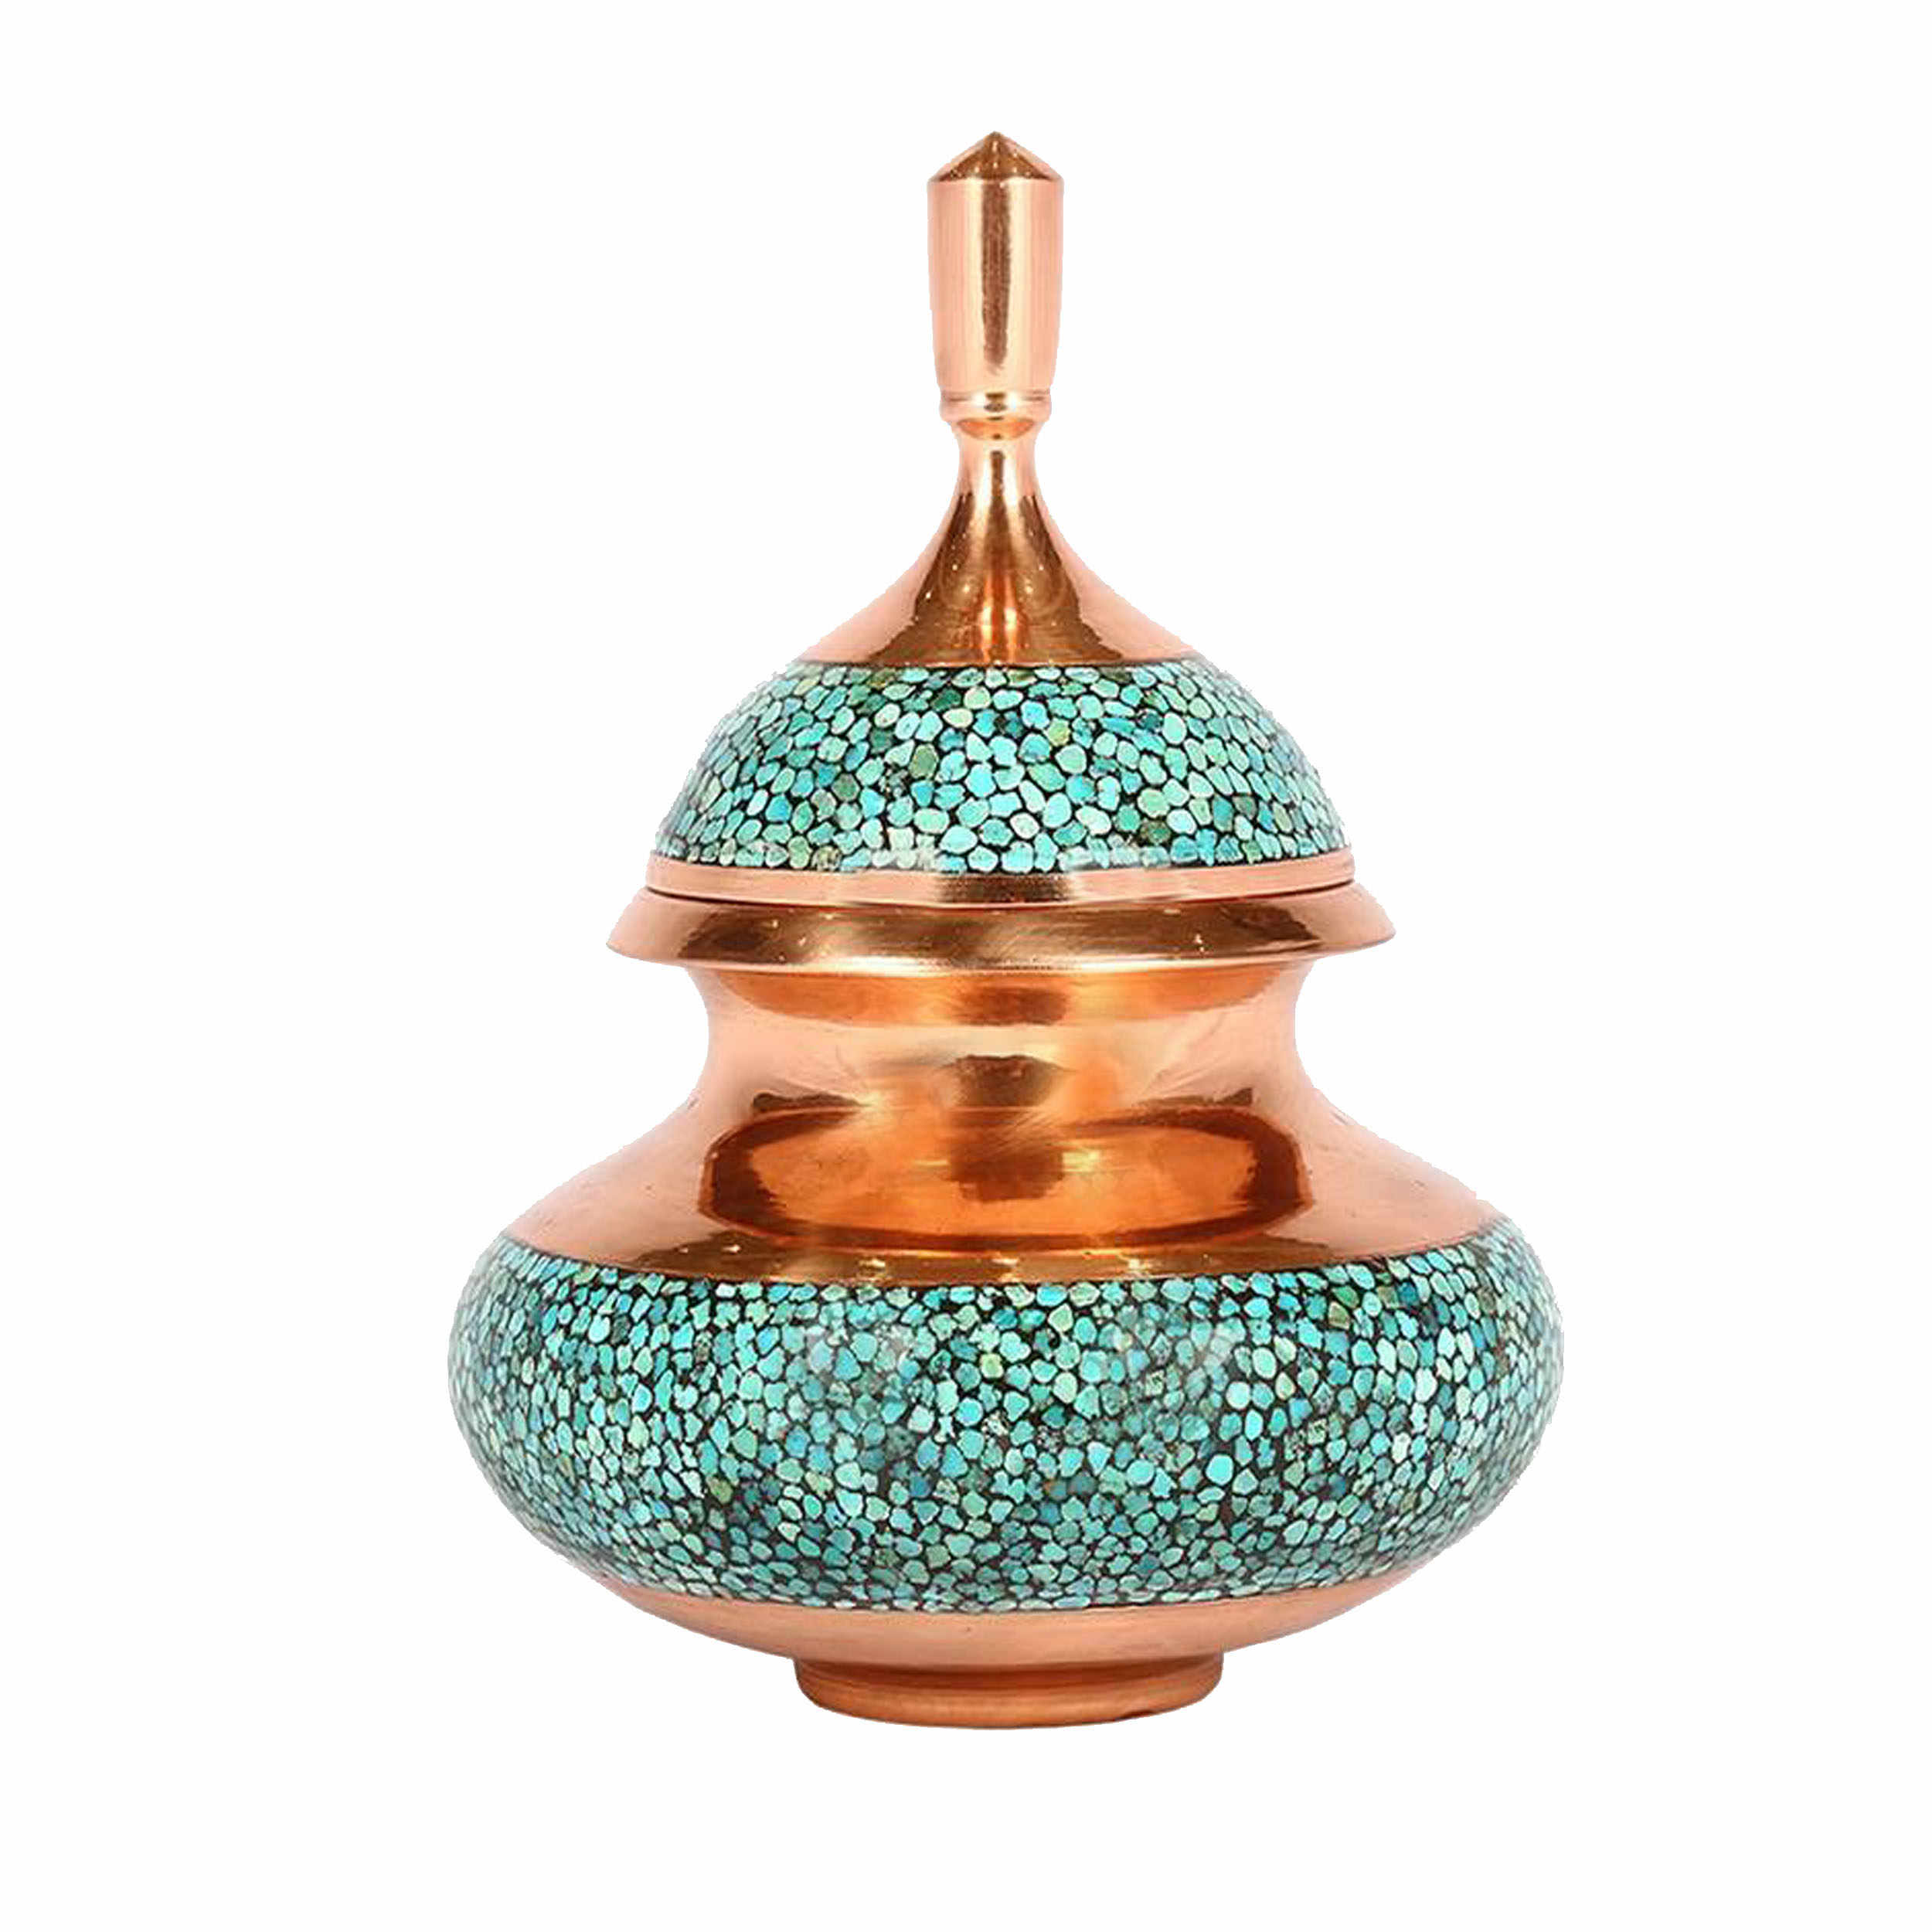 Copper Turquoise inlaying sugar/candy pot dish, code 5269